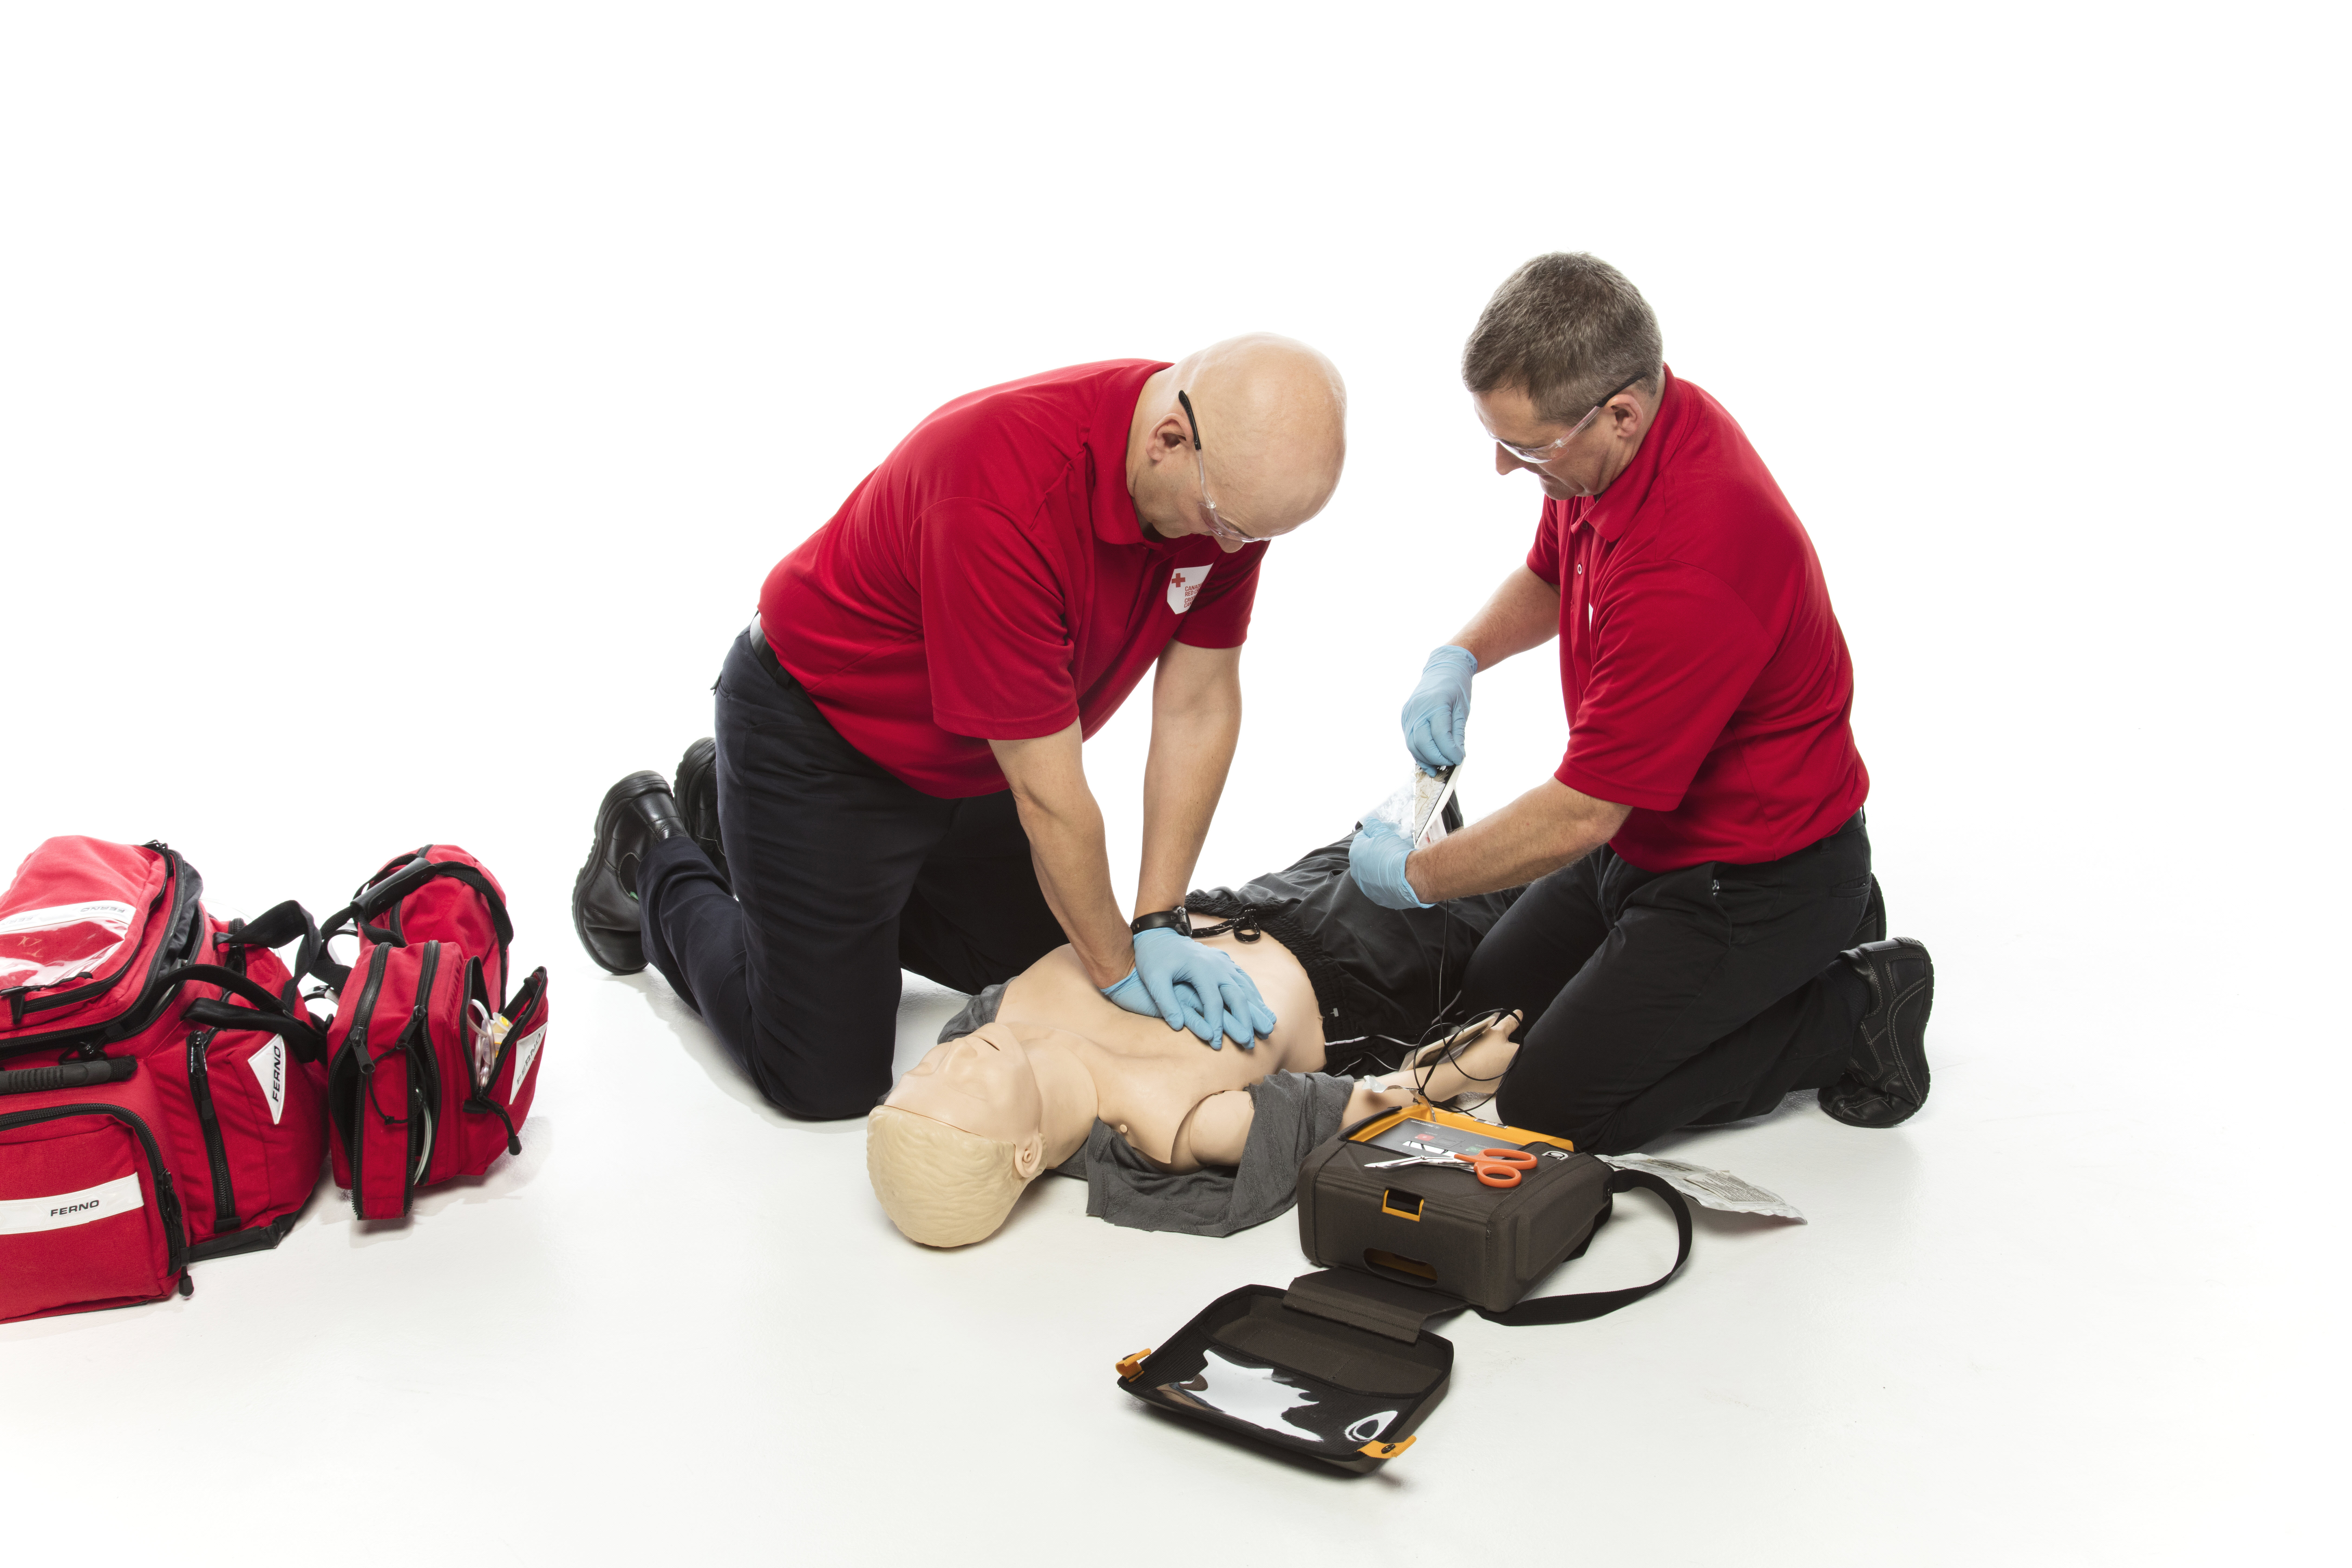 First Aid Course: Basic Life Support Victoria